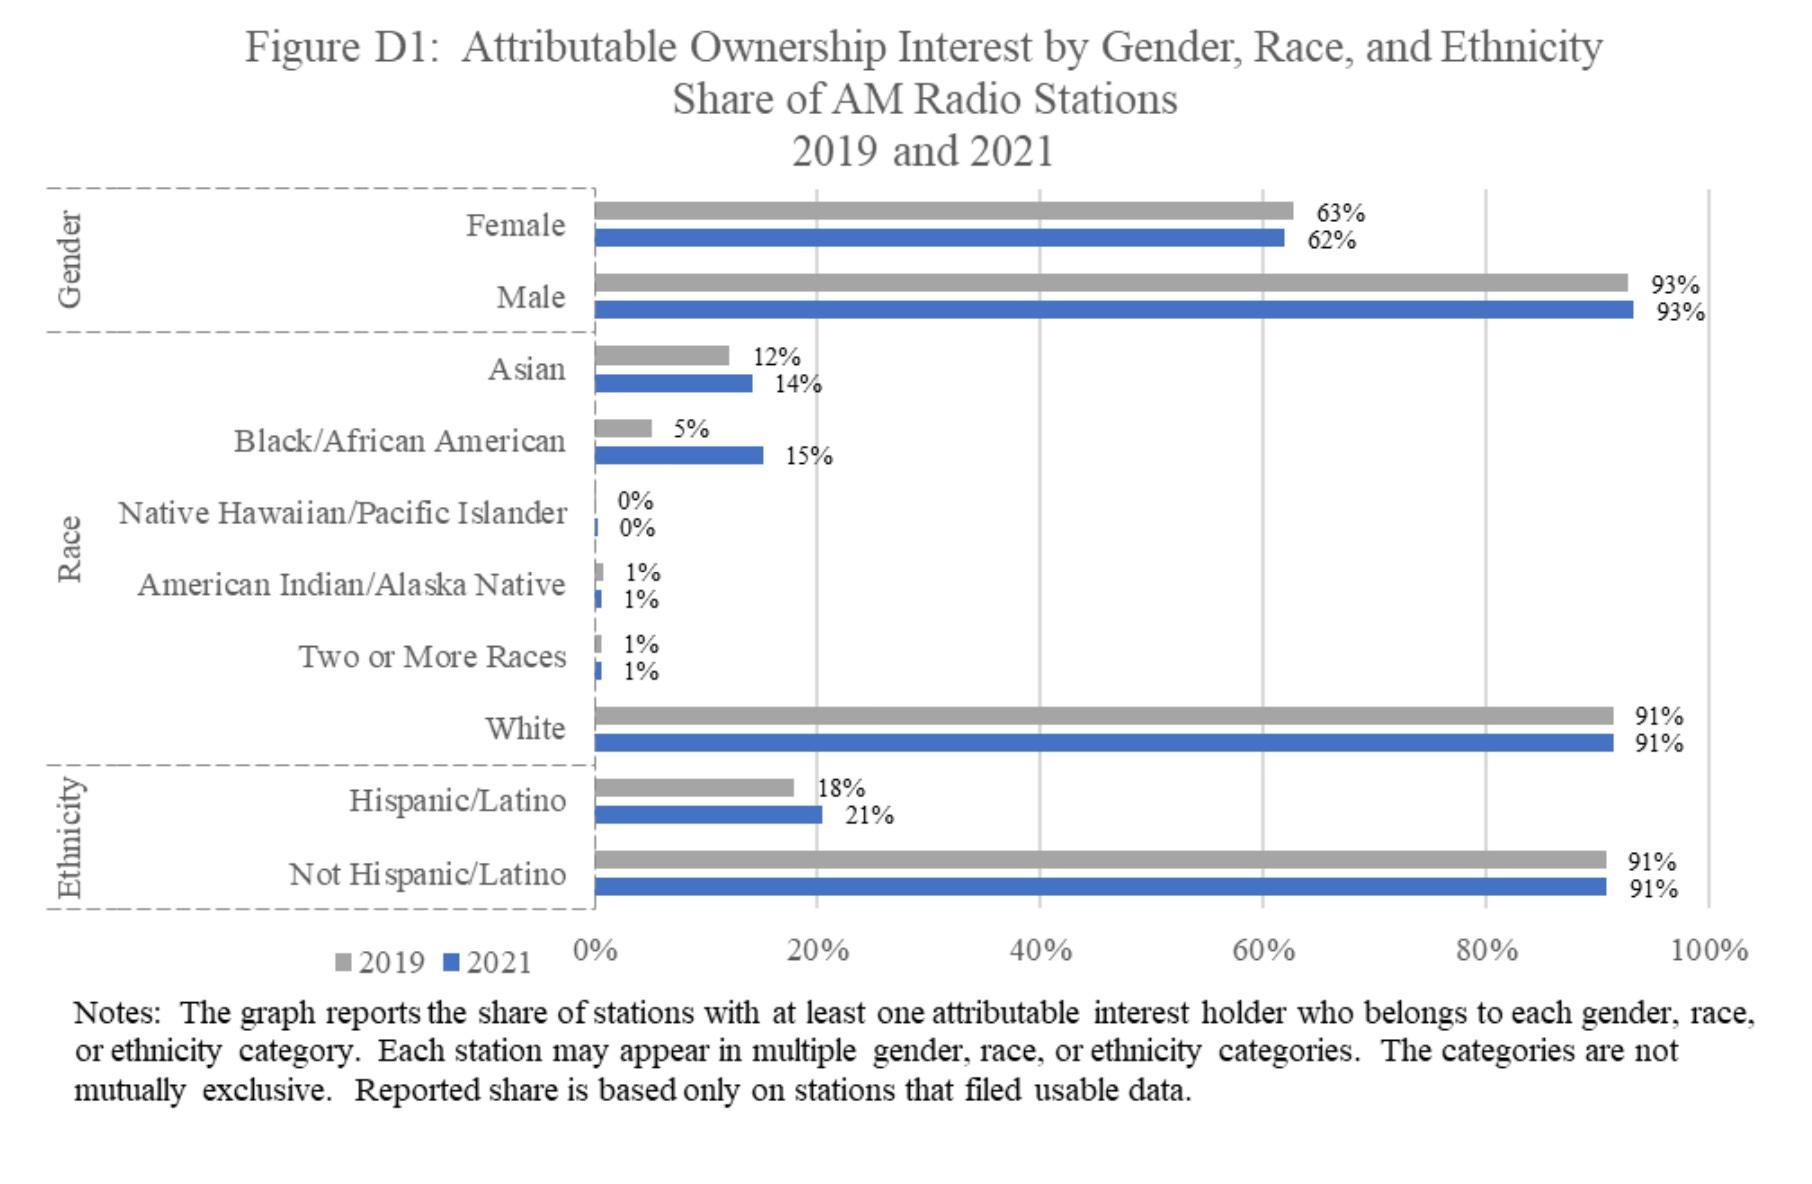 Attributable Ownership Interest by Gender, Race, and Ethnicity Share of AM Radio Stations